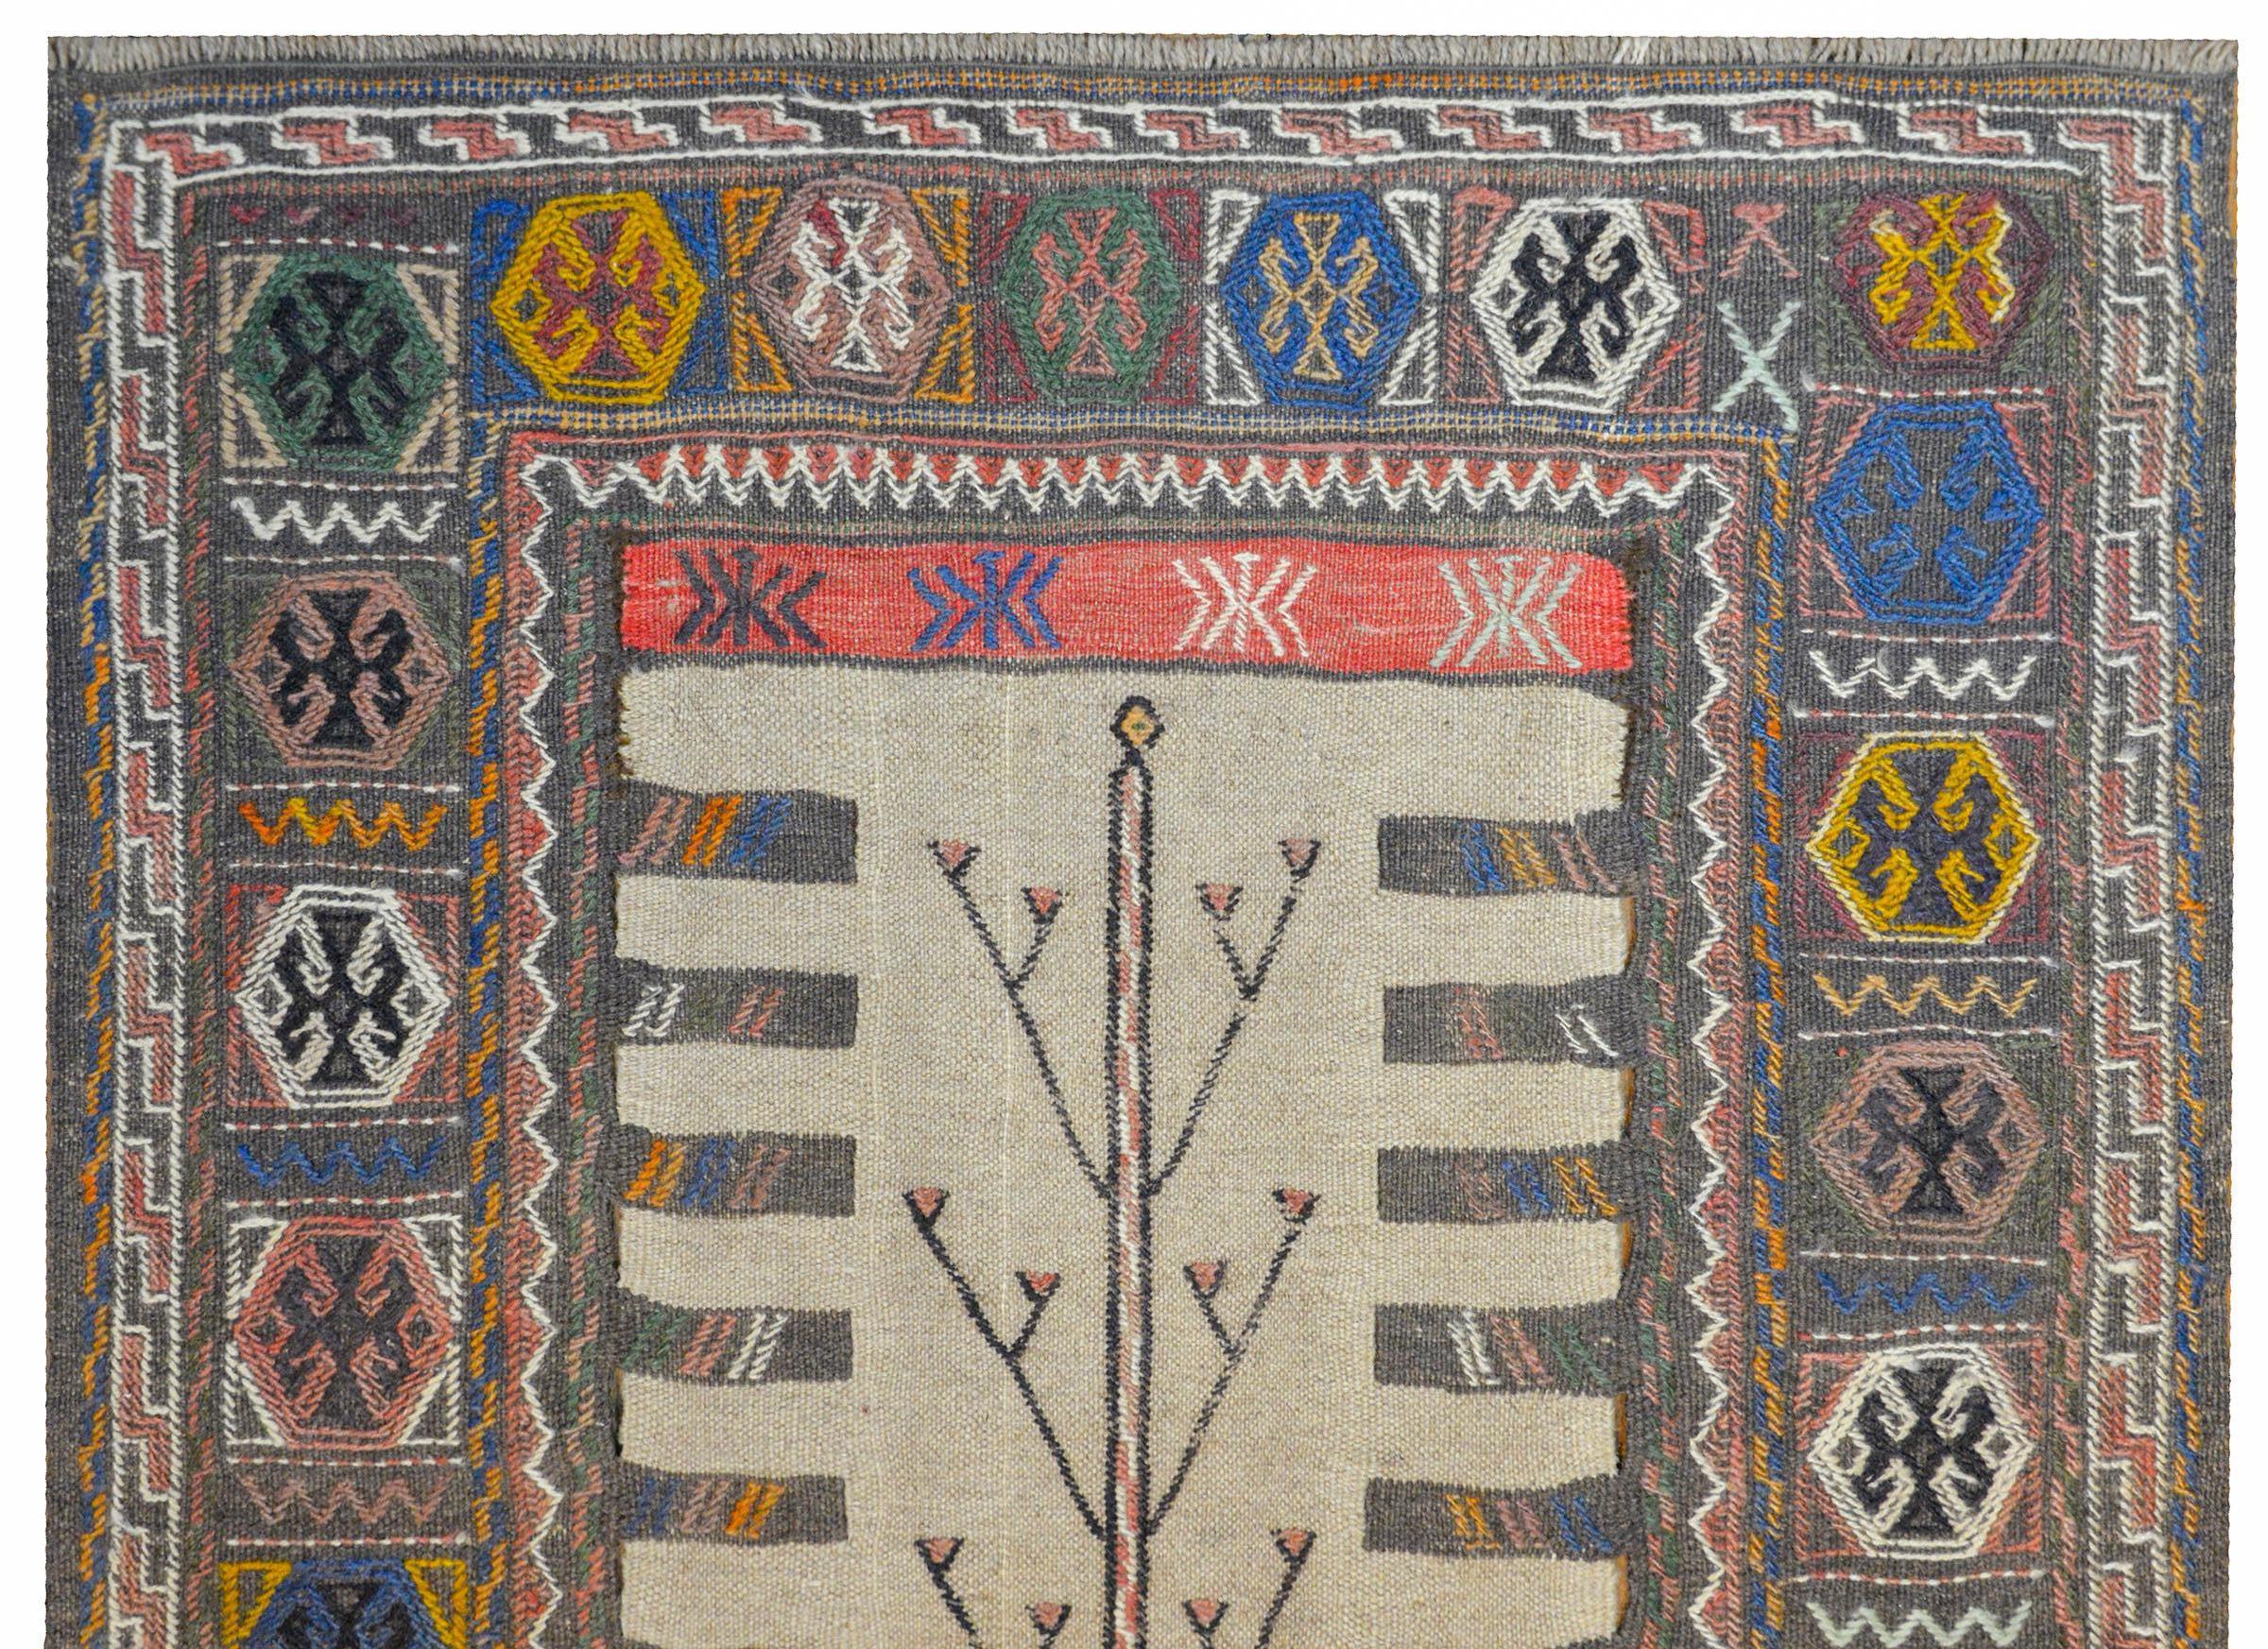 An incredible mid-20th century Afghani Baluch runner with a fantastic flat-weave pattern containing a stylized tree-of-life pattern down the center of the field, and a border with myriad stylized flowers.